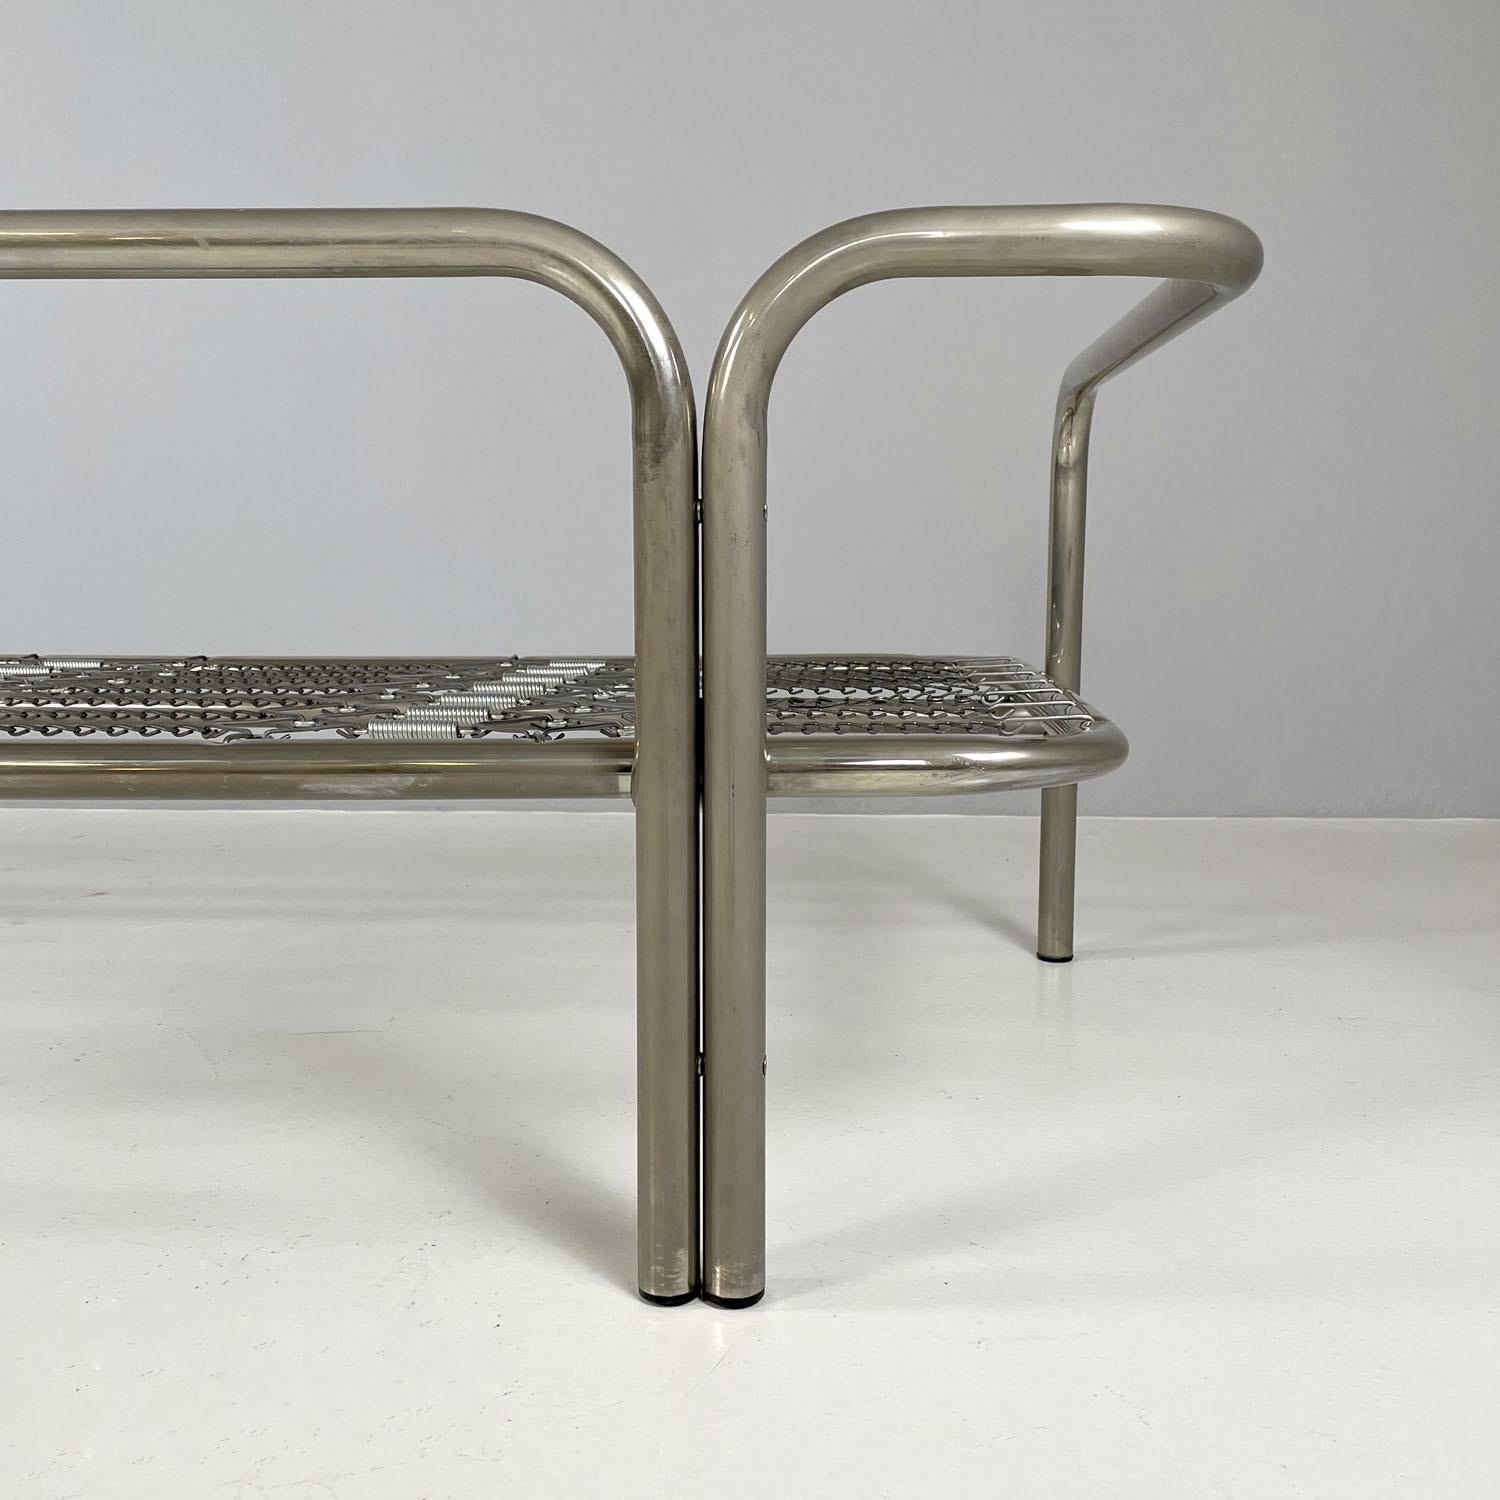 Italian modern daybed sofa Locus Solus by Gae Aulenti for Poltronova, 1970s For Sale 3